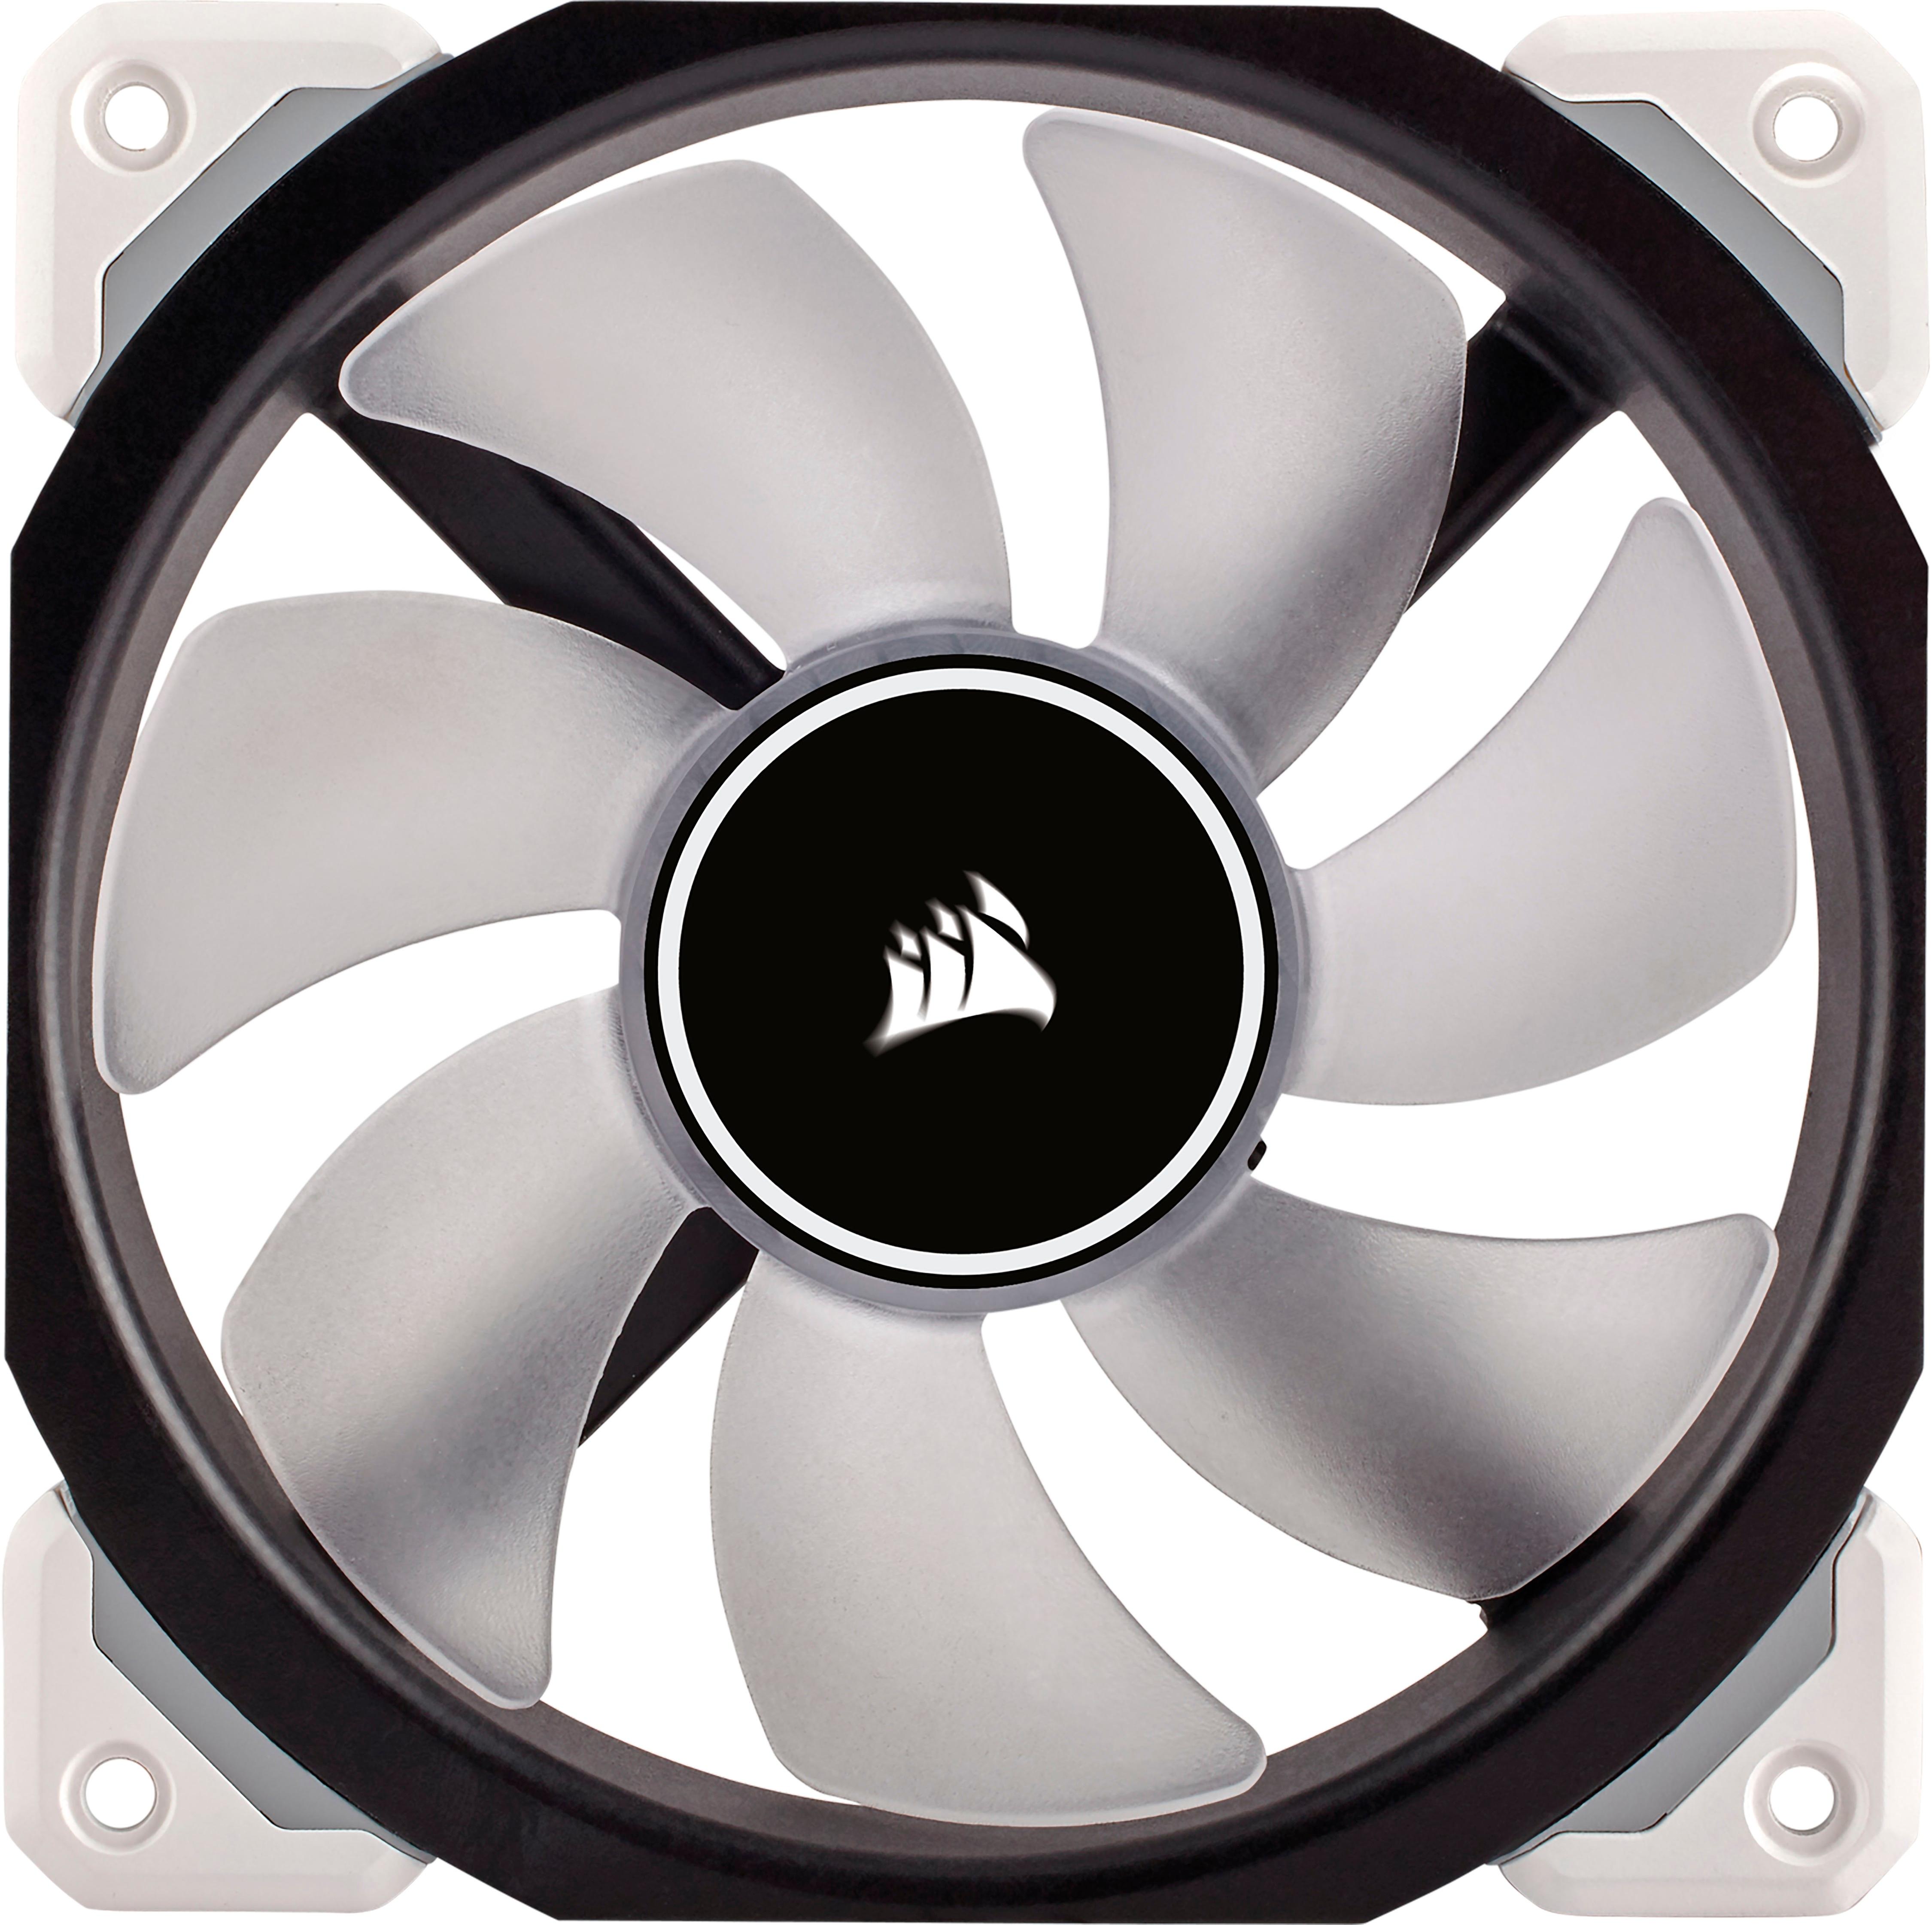 CORSAIR - ML Series 120mm Case Cooling Fan - White was $31.99 now $19.99 (38.0% off)